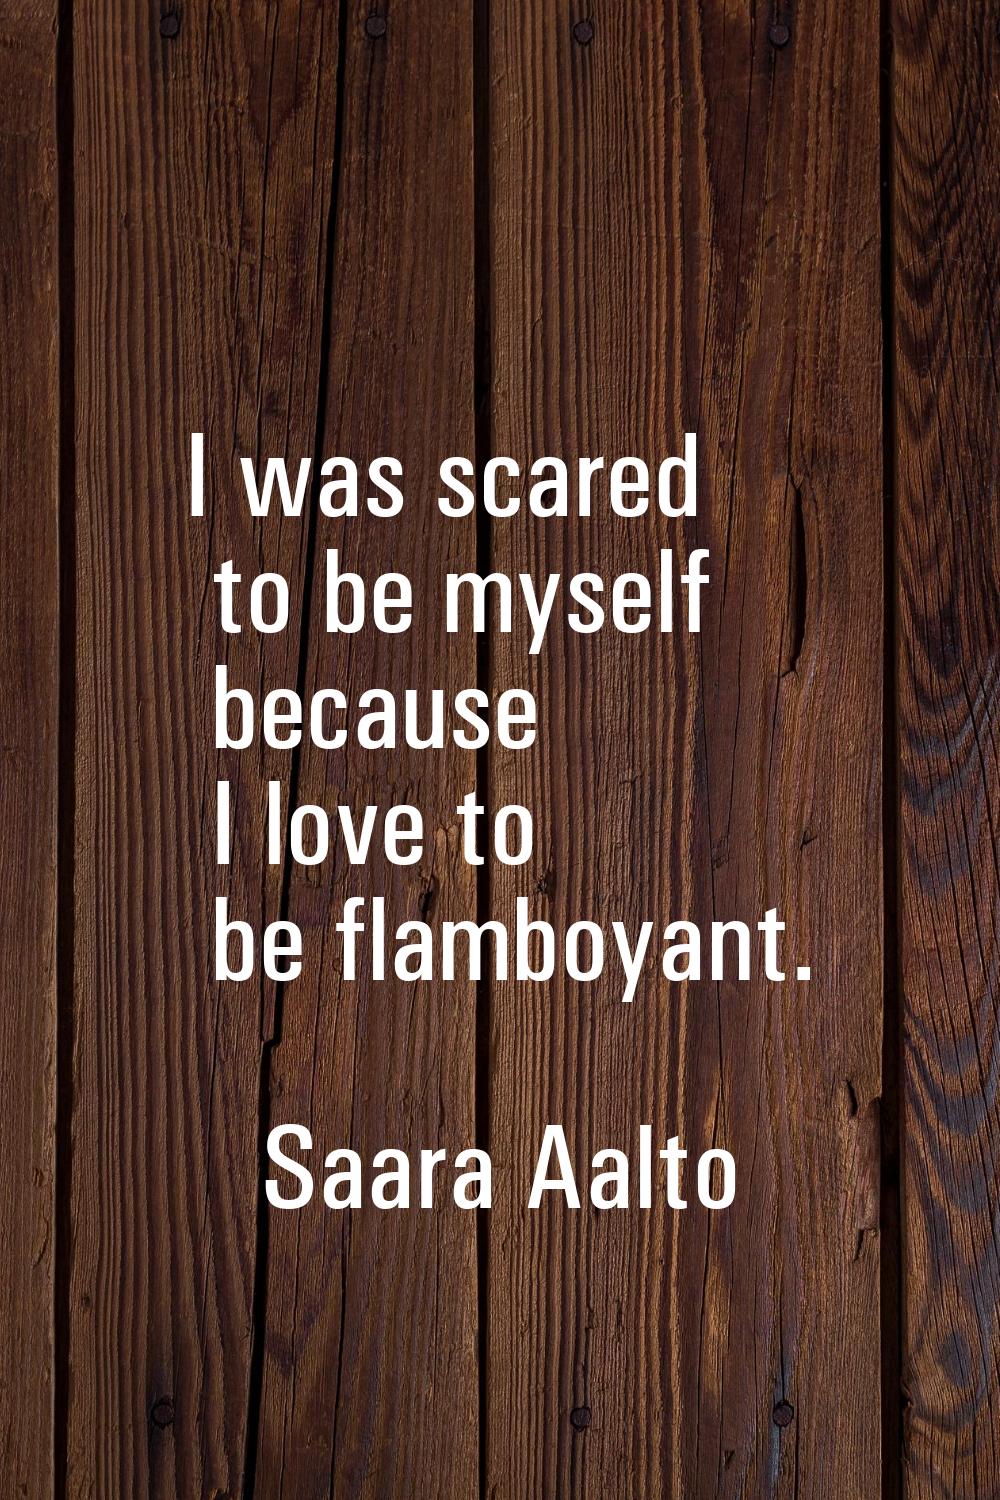 I was scared to be myself because I love to be flamboyant.